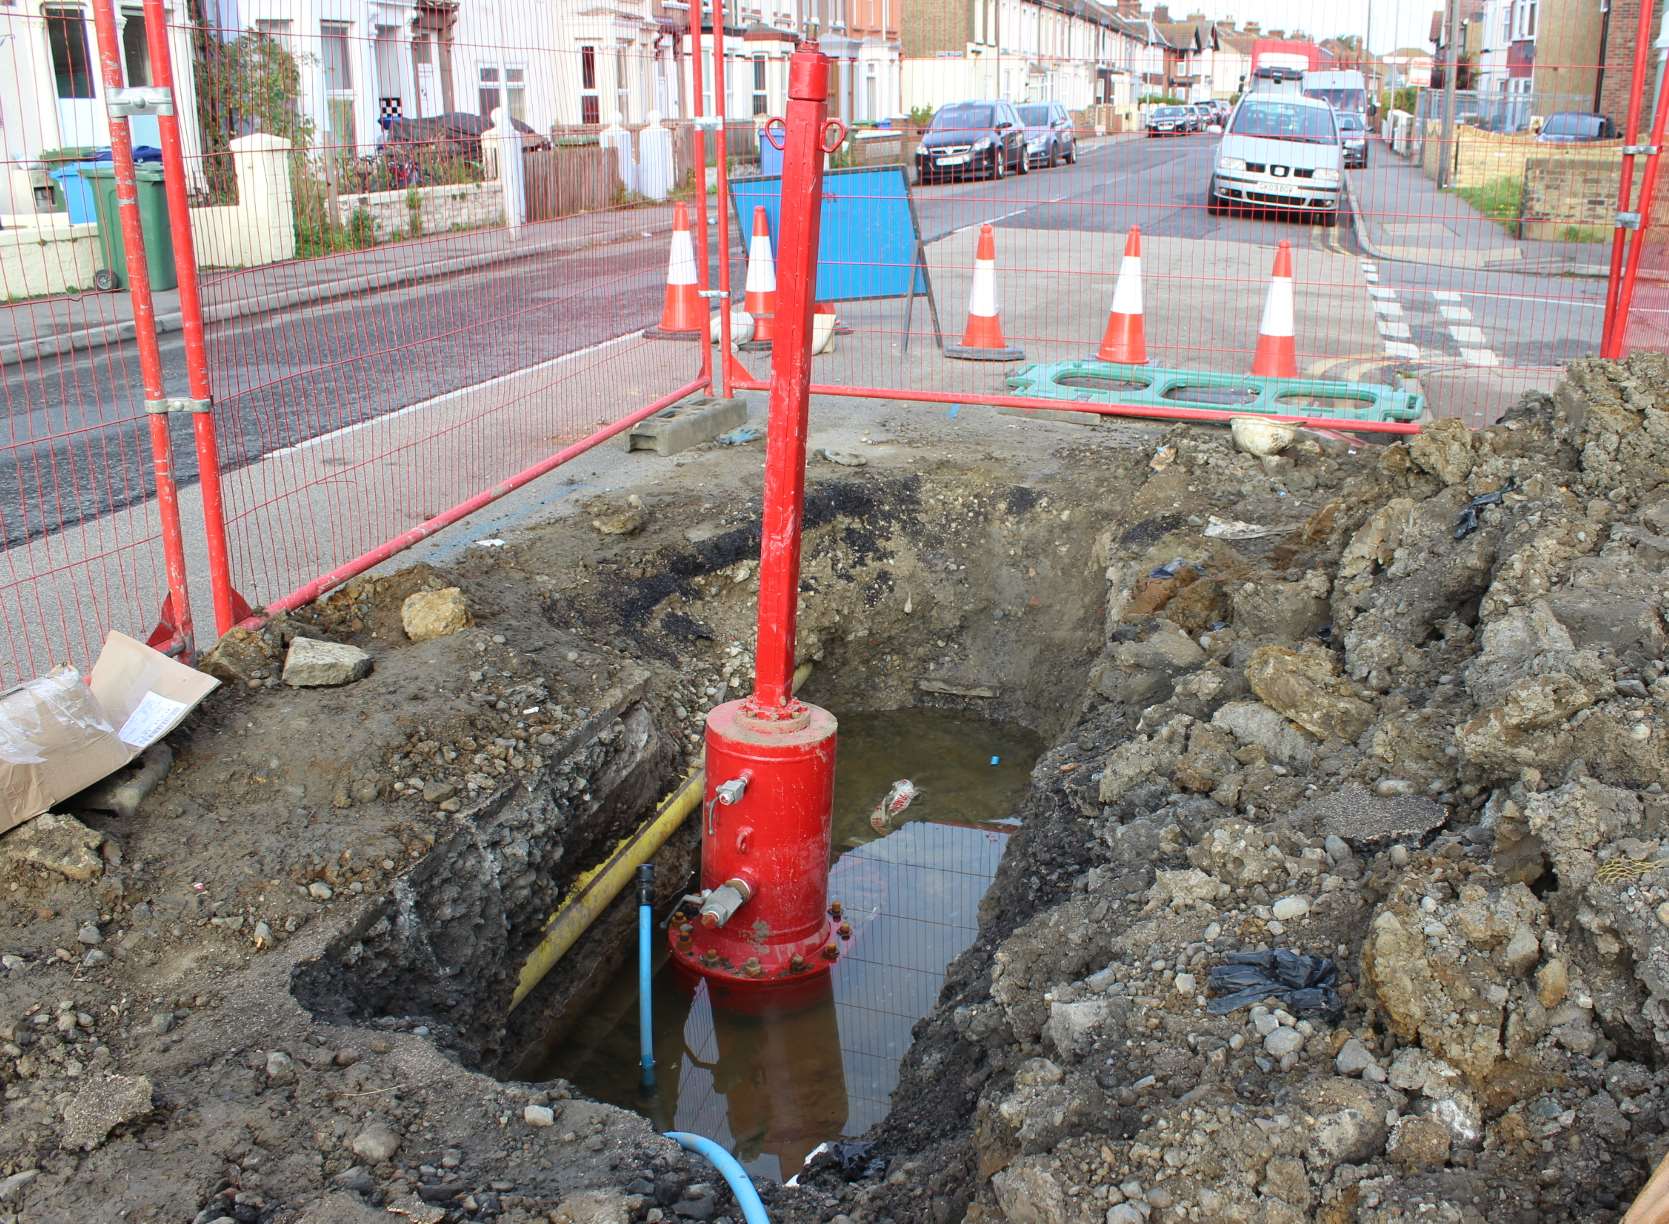 The special valve which has sealed off the water main.